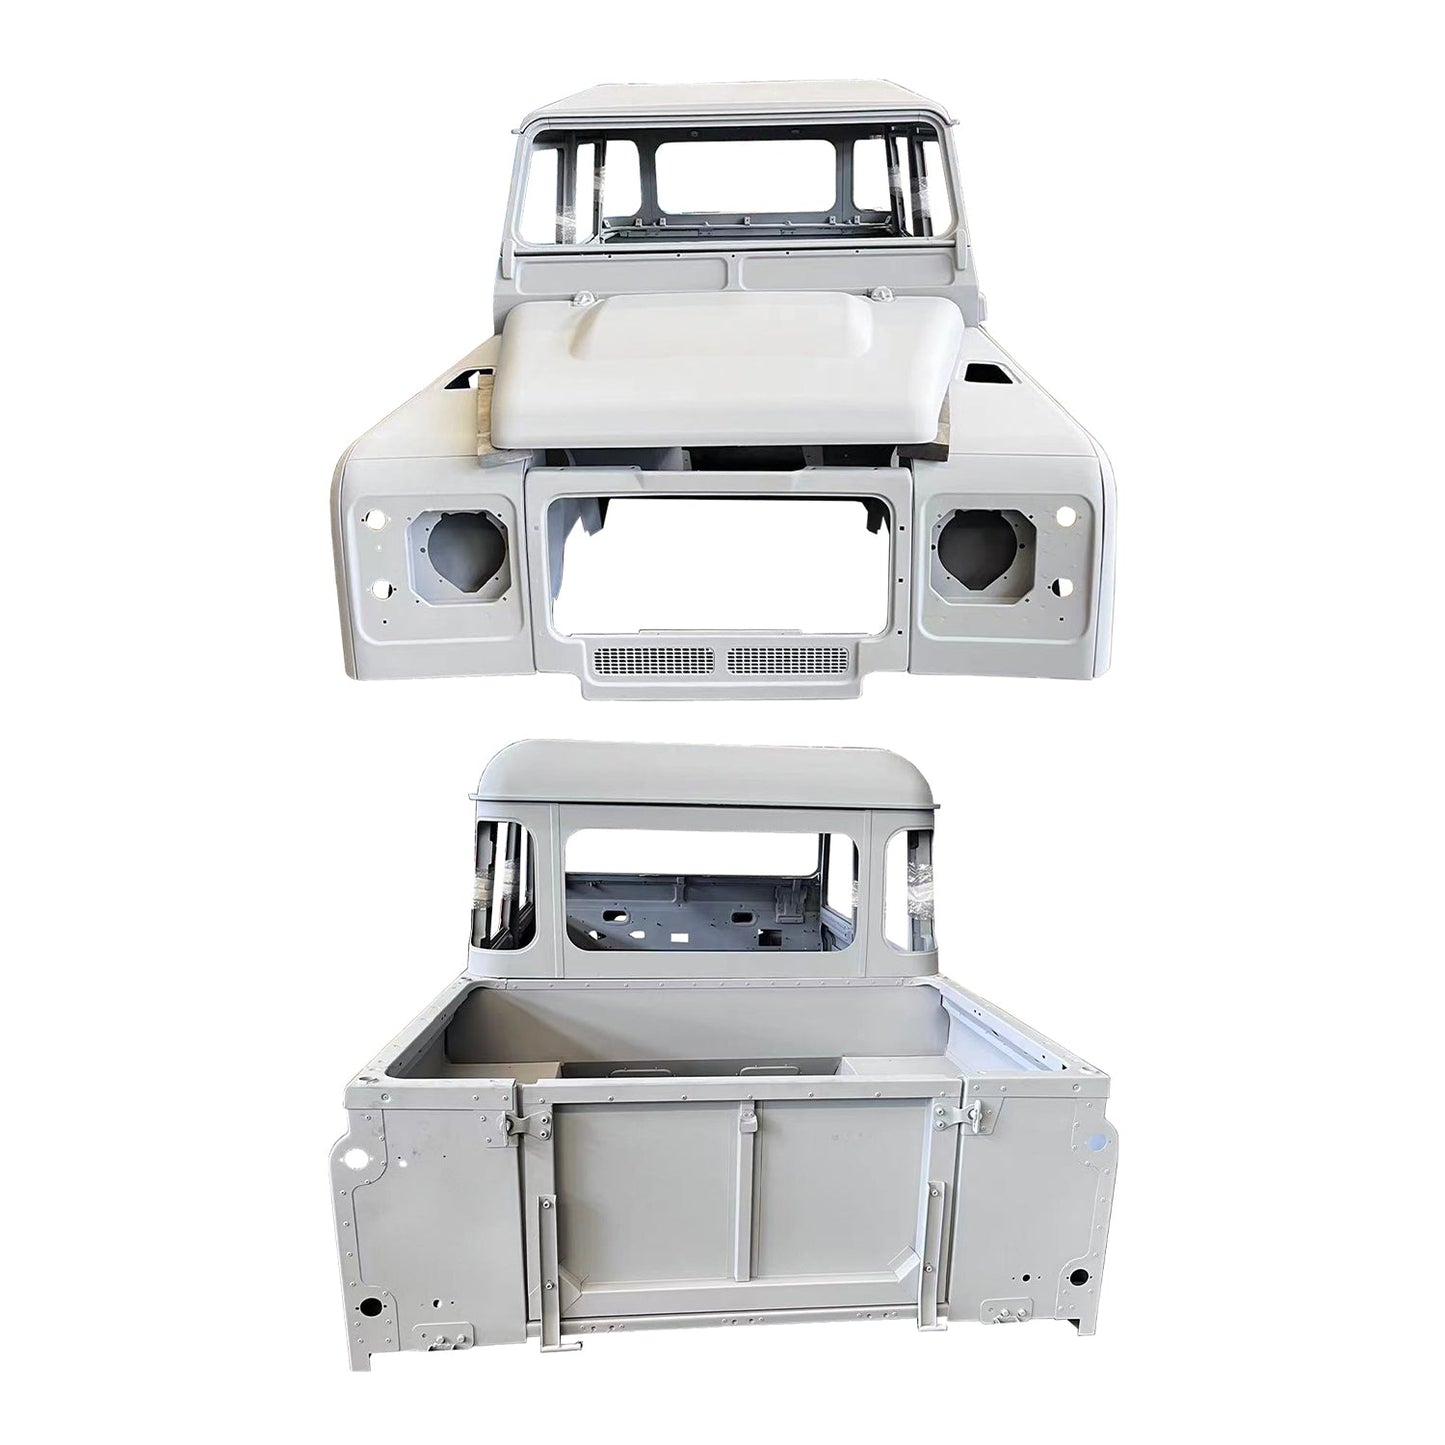 Complete Cab With Doors, With Primer, For Land Rover Defender 110 Pickup Pre-Order Only